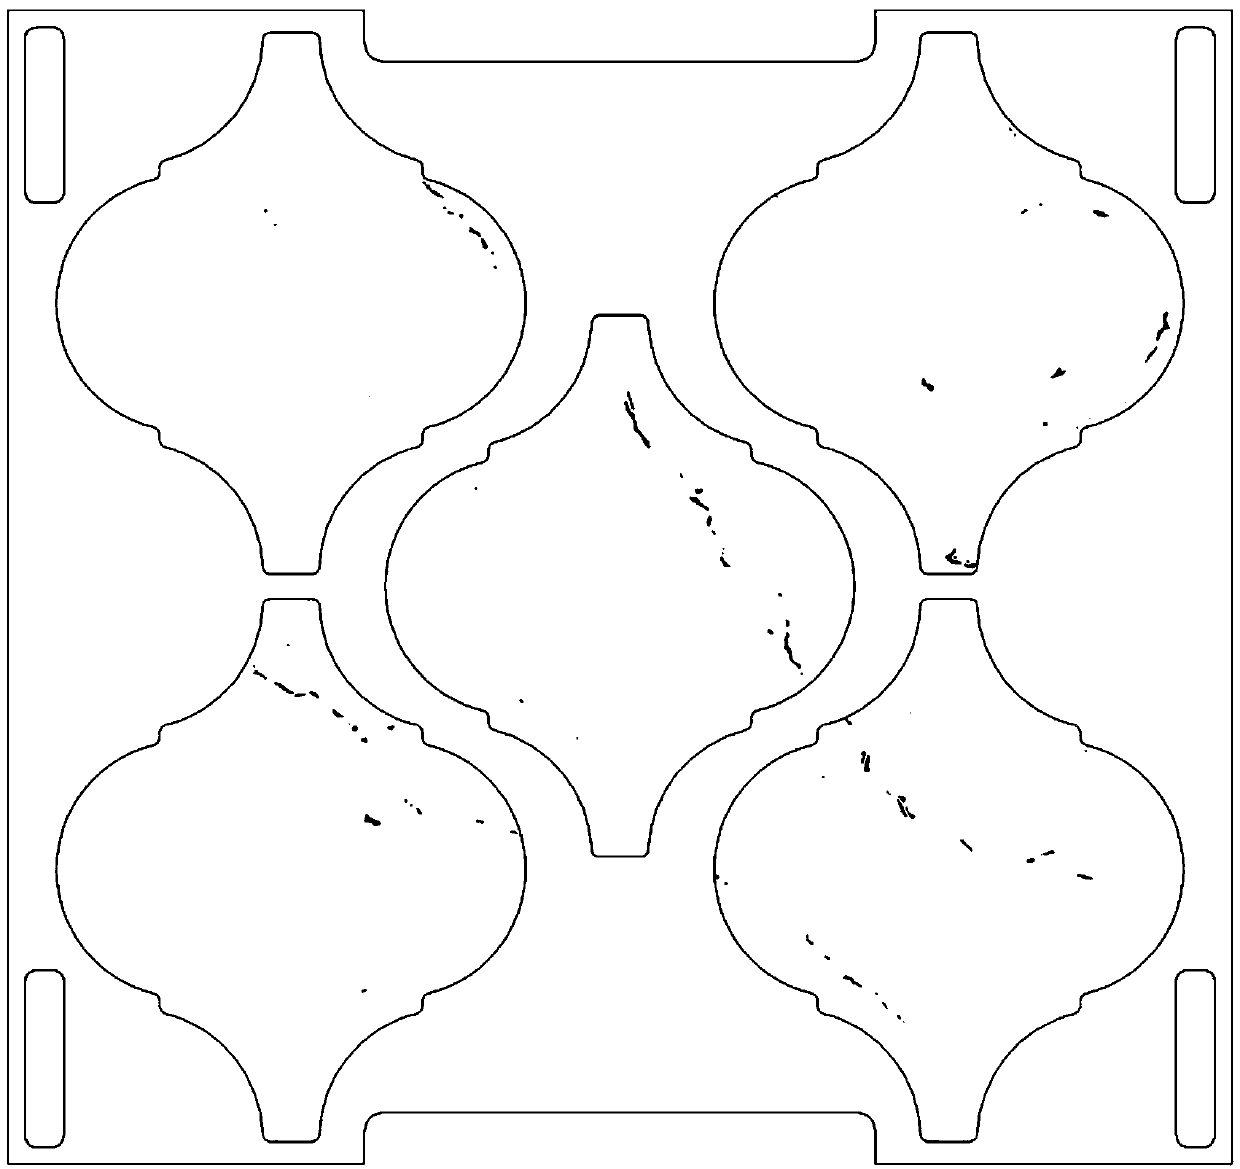 Preparation method of glass mosaic with marble patterns on the whole body